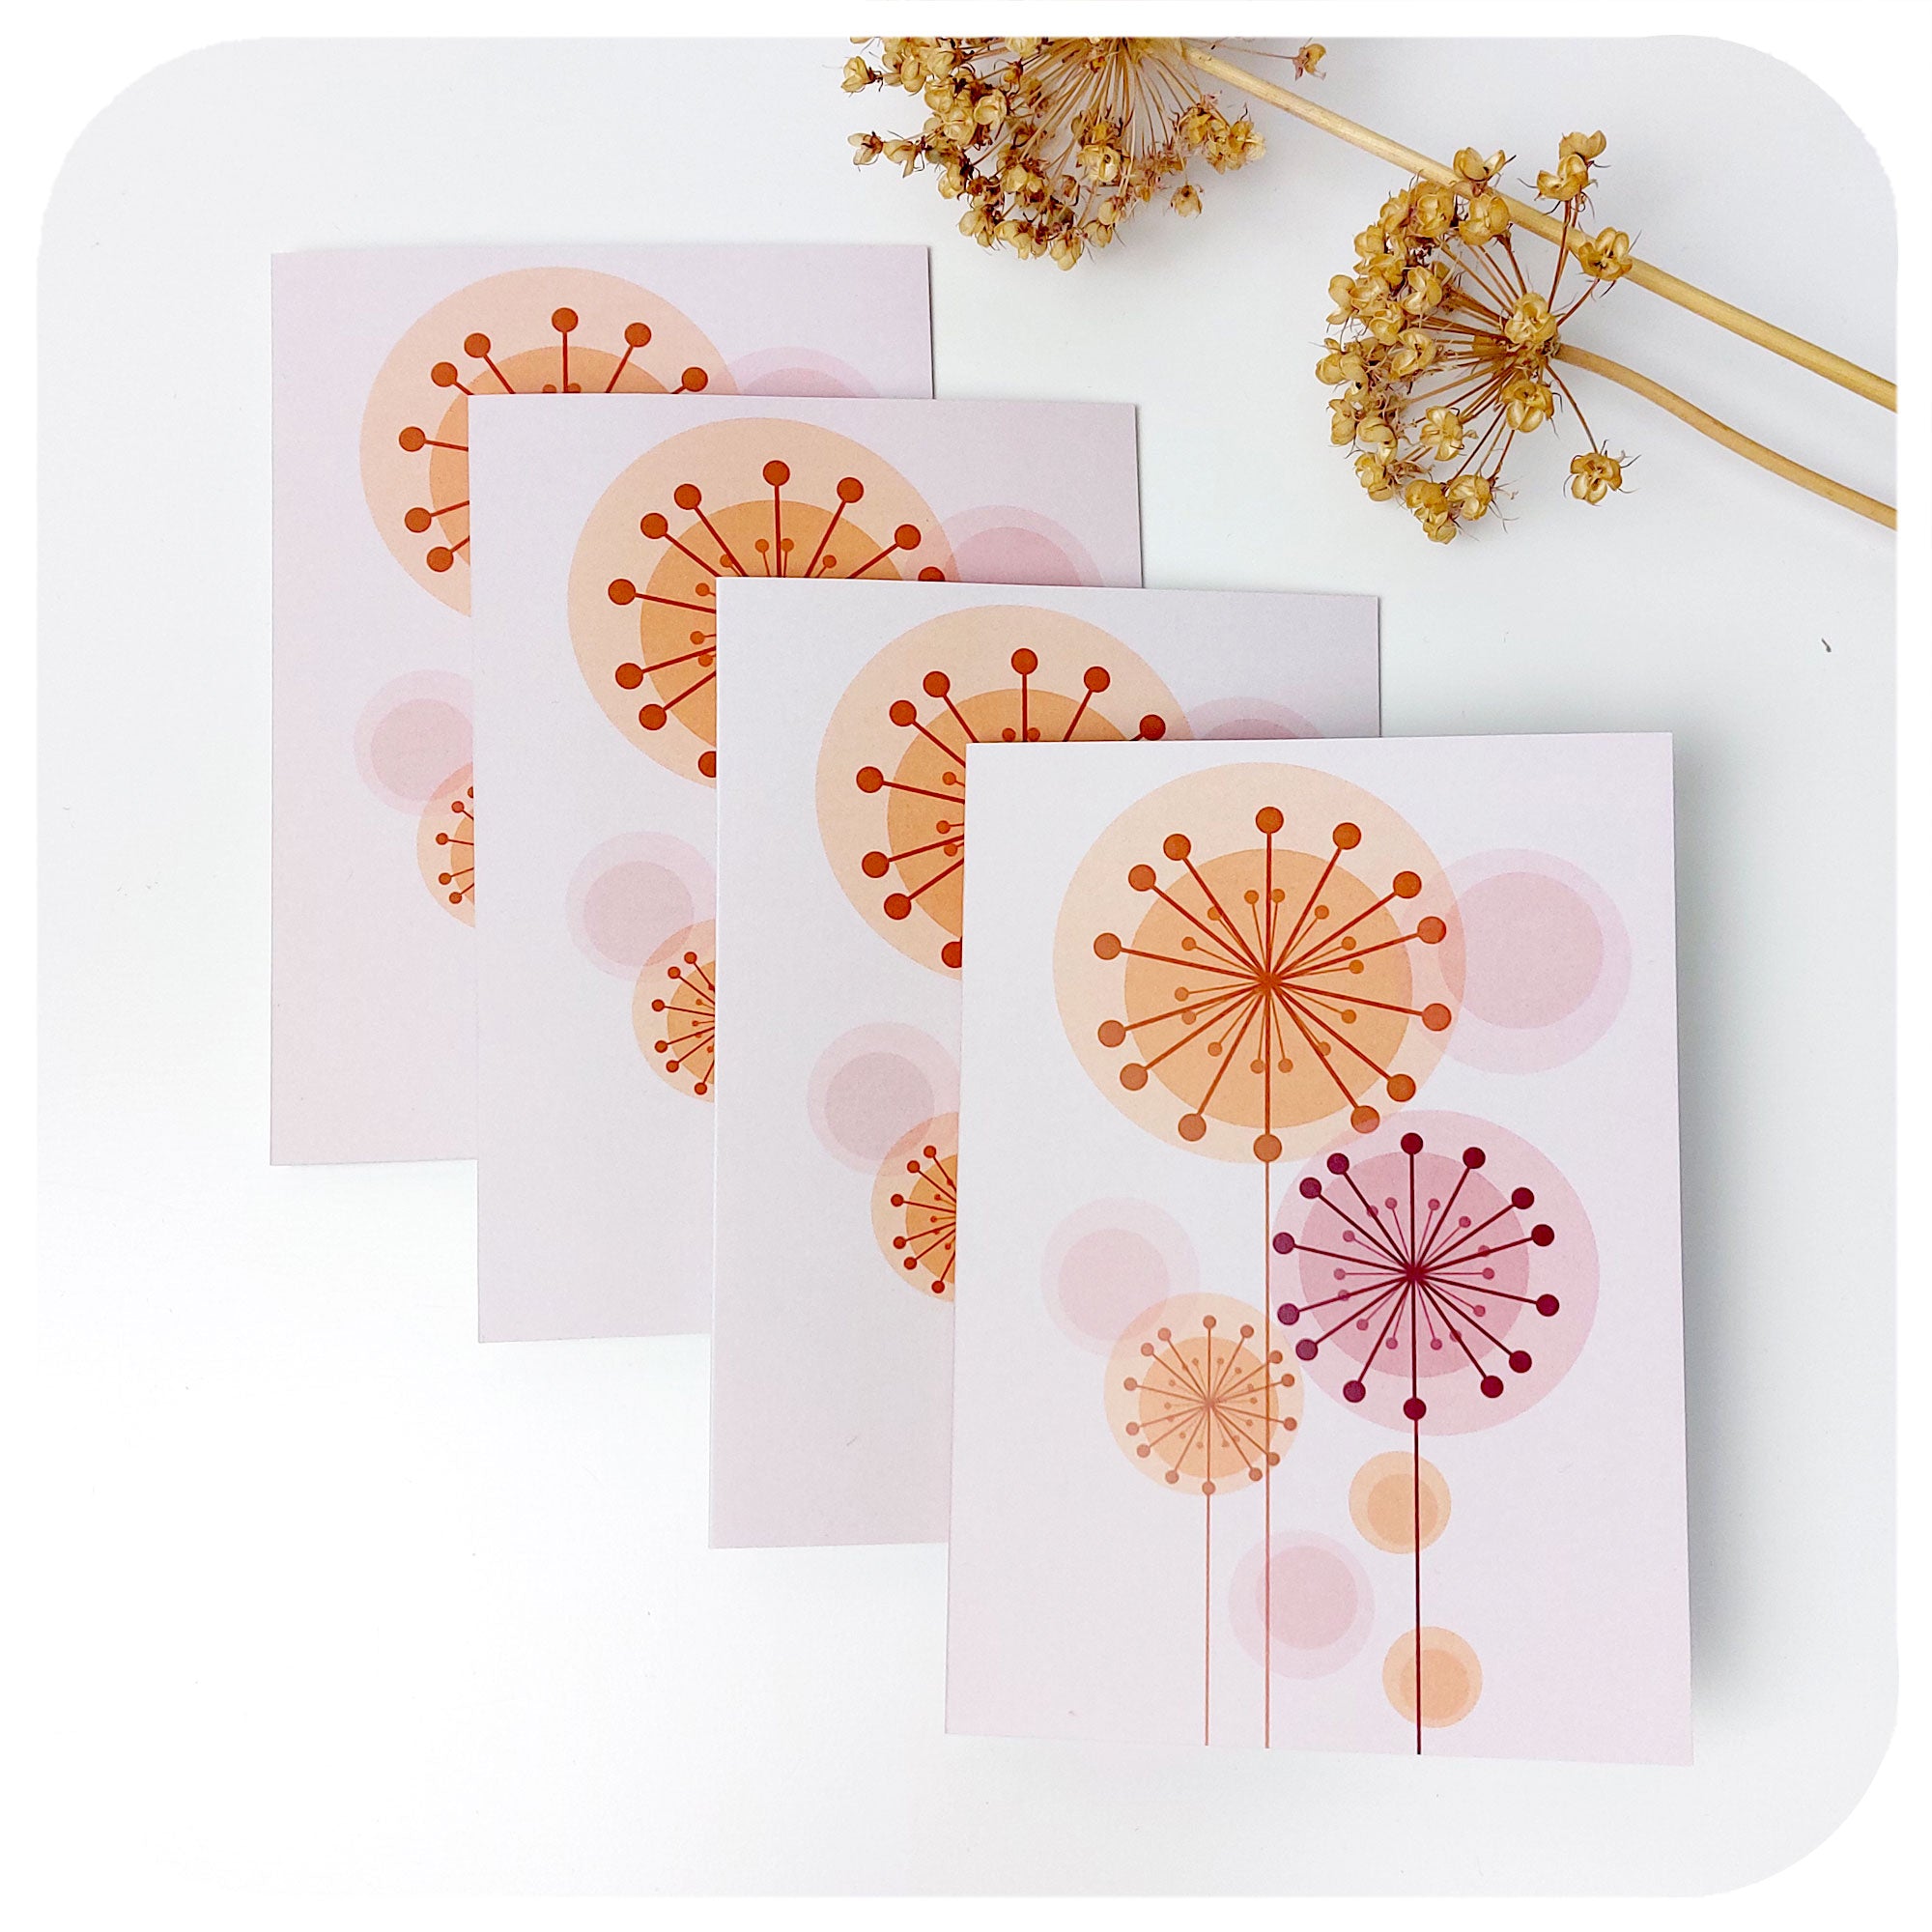 Retro Alliums Blank Greetings Cards - Pack of 4 | The Inkabilly Emporium